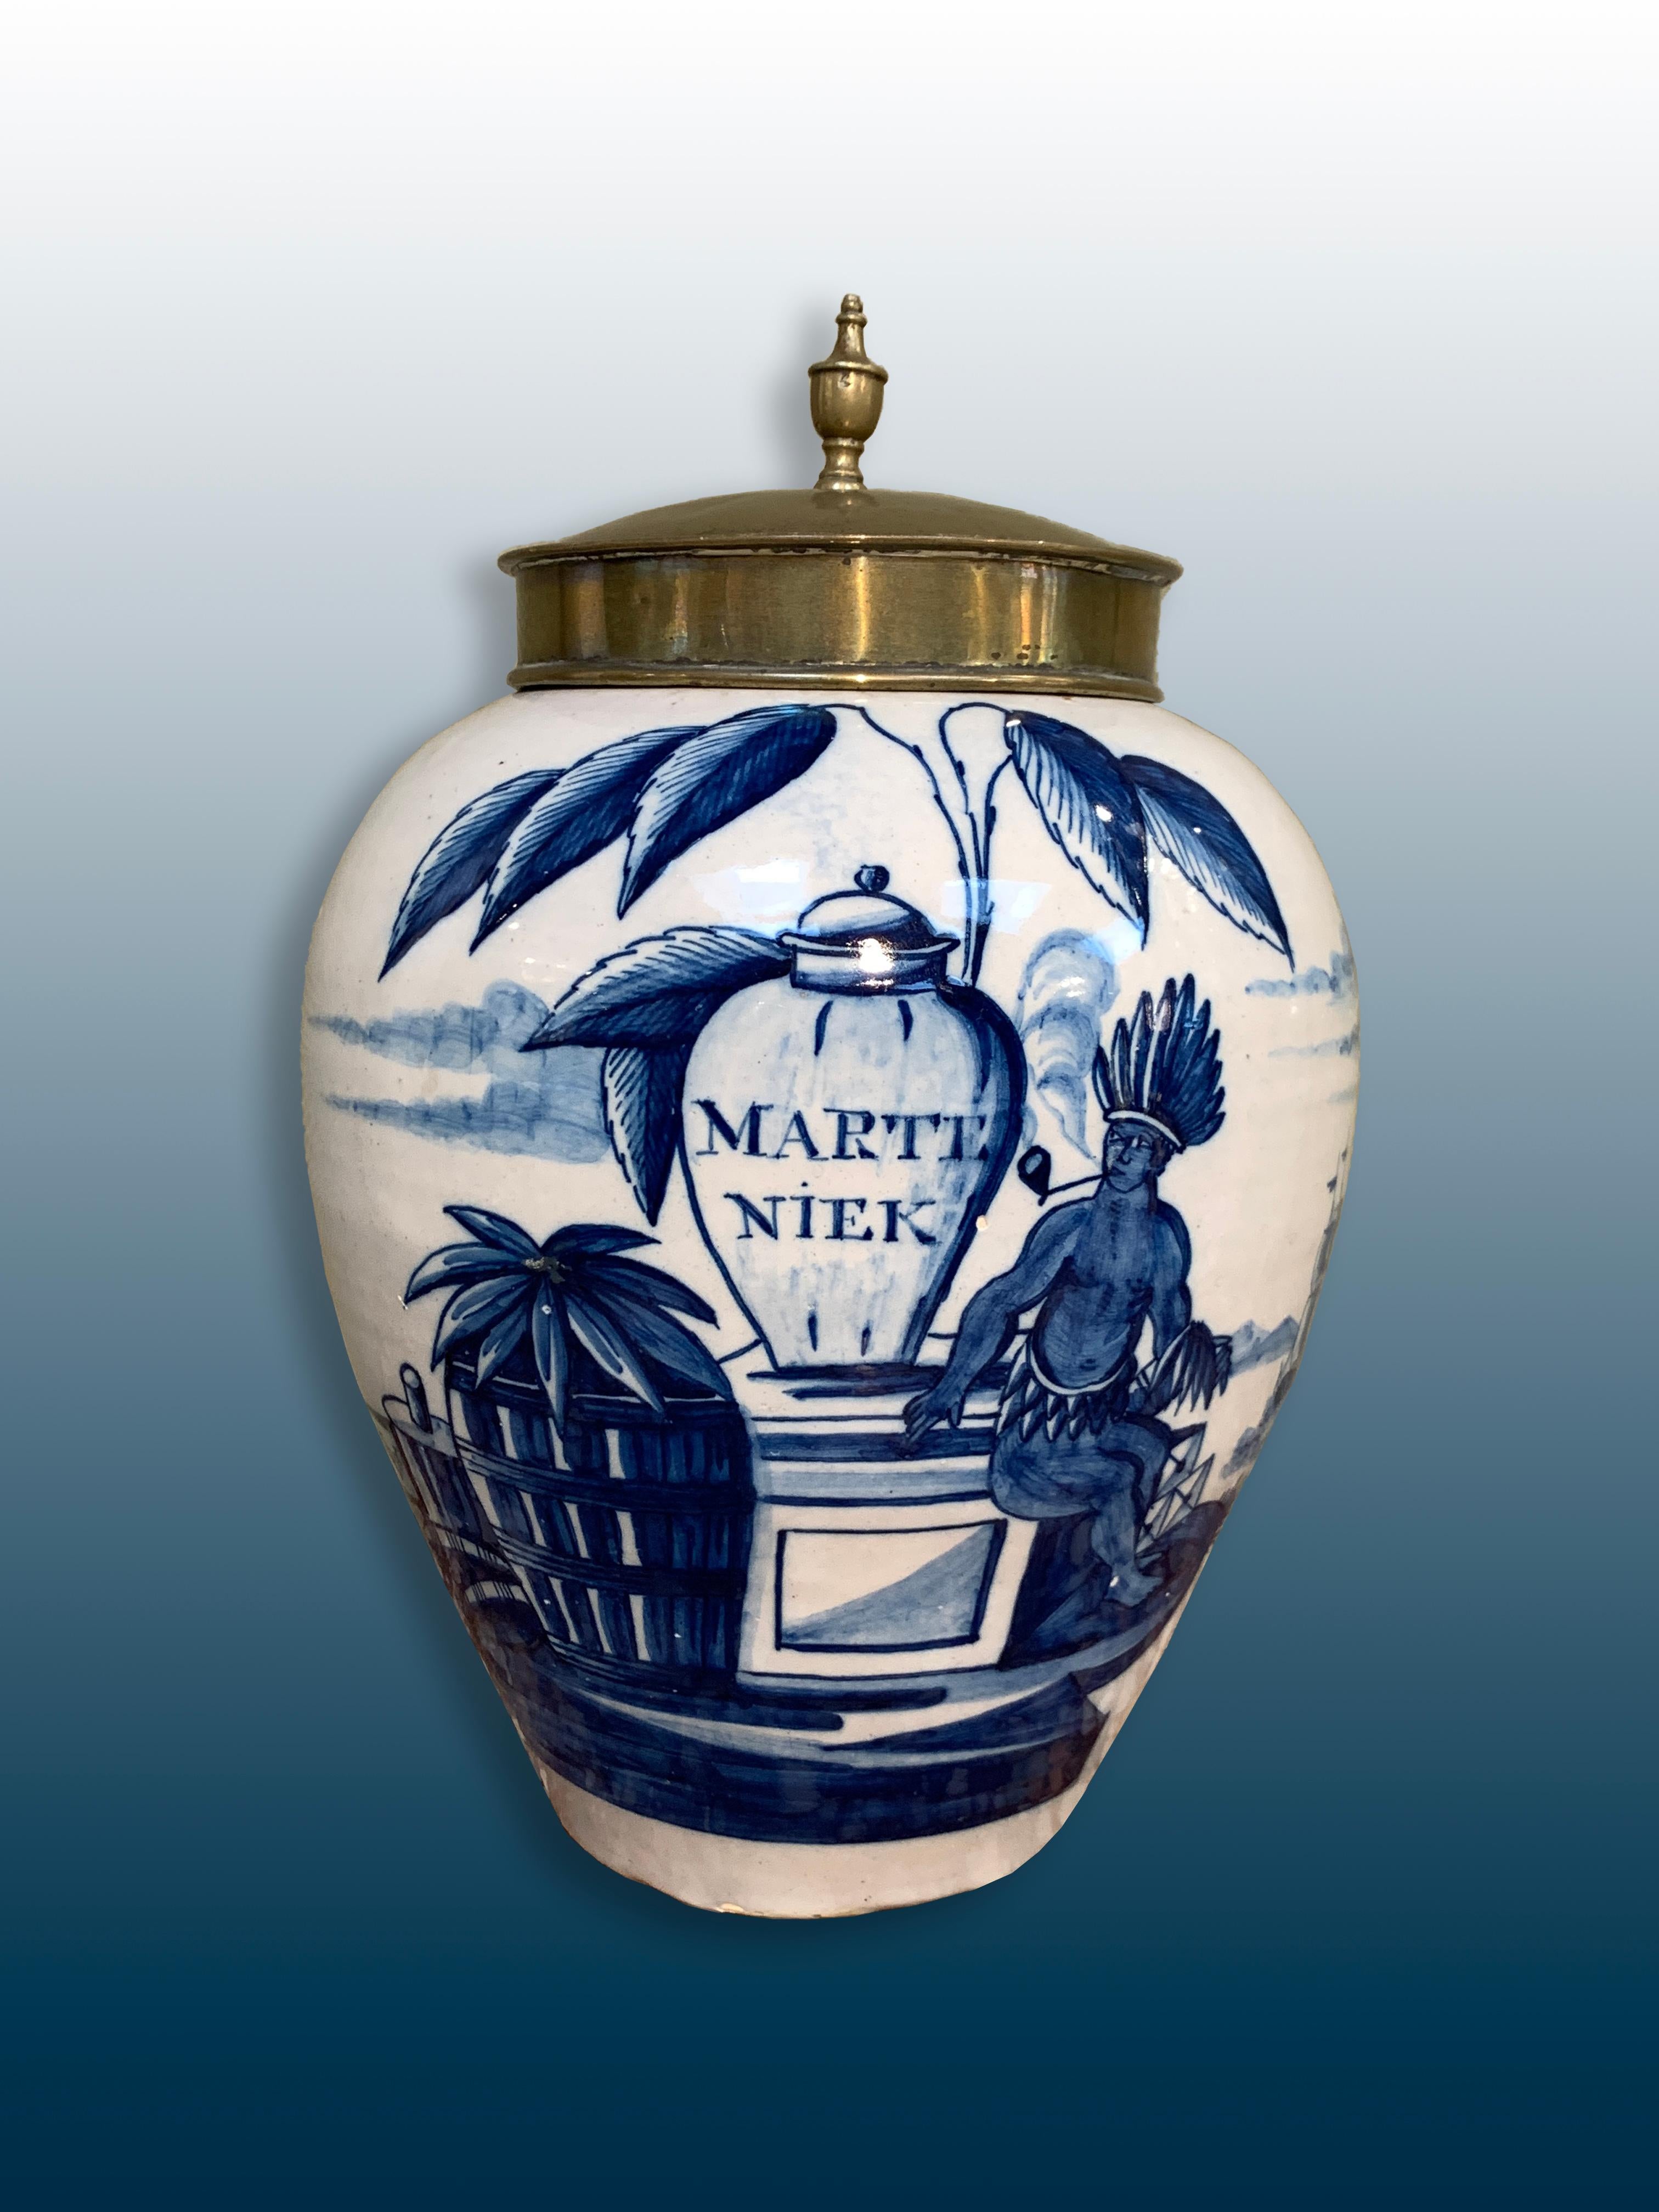 A Dutch Delftware VOC Tobacco jar with a brass lid. 

Origine: Delft, The Netherlands
Date: Second half of the 18th Century
Workshop: De Vergulde Blompot (The gilded flower pot).
Marked BP

A genuine blue and white tobacco jar for the storage